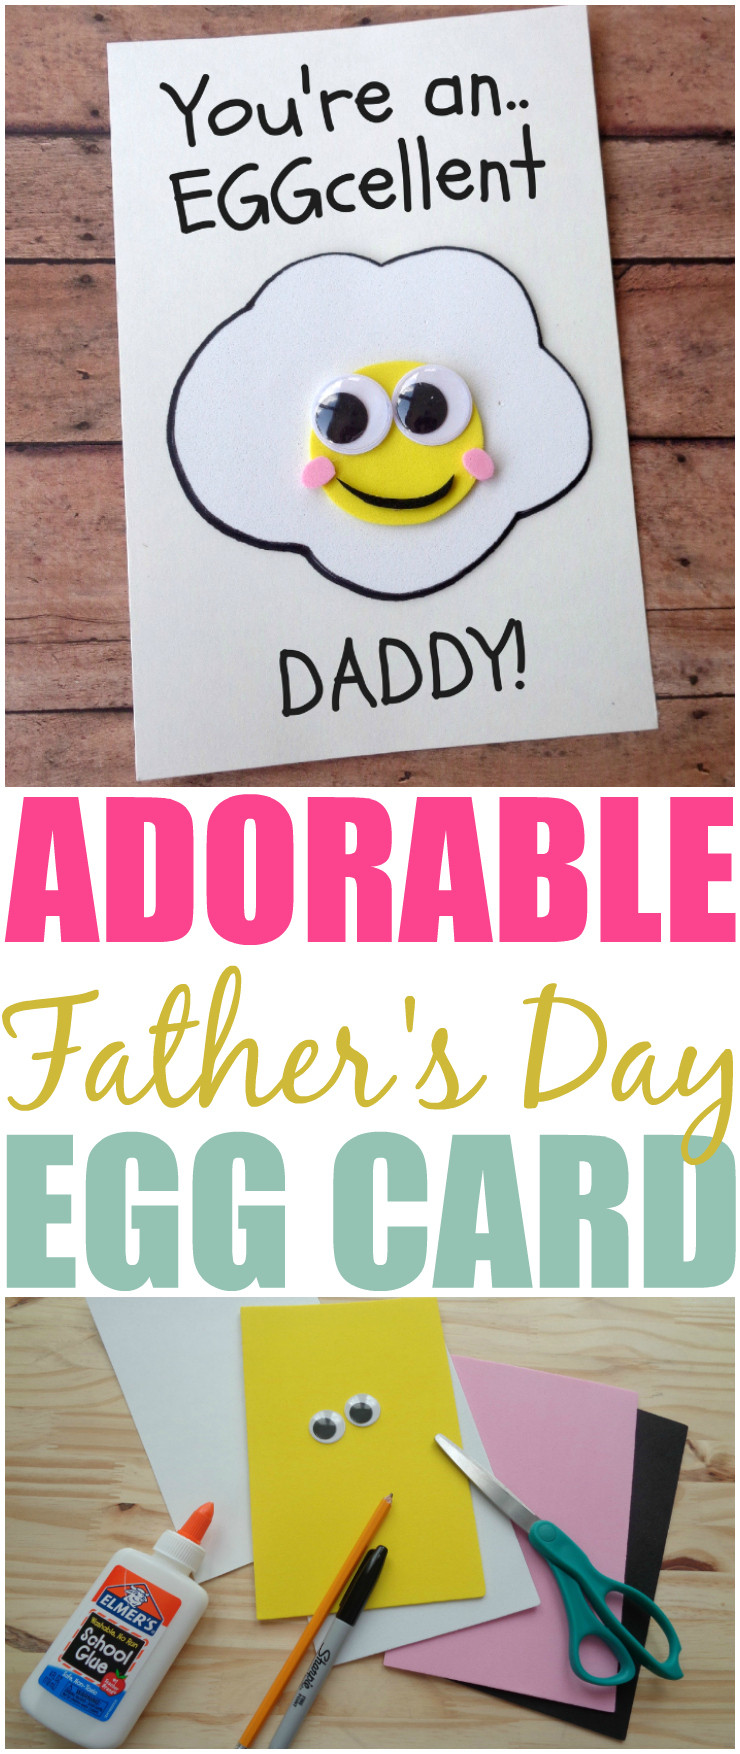 Fathers Day Card Diy
 15 DIY Father’s Day Cards and Gifts to make at home